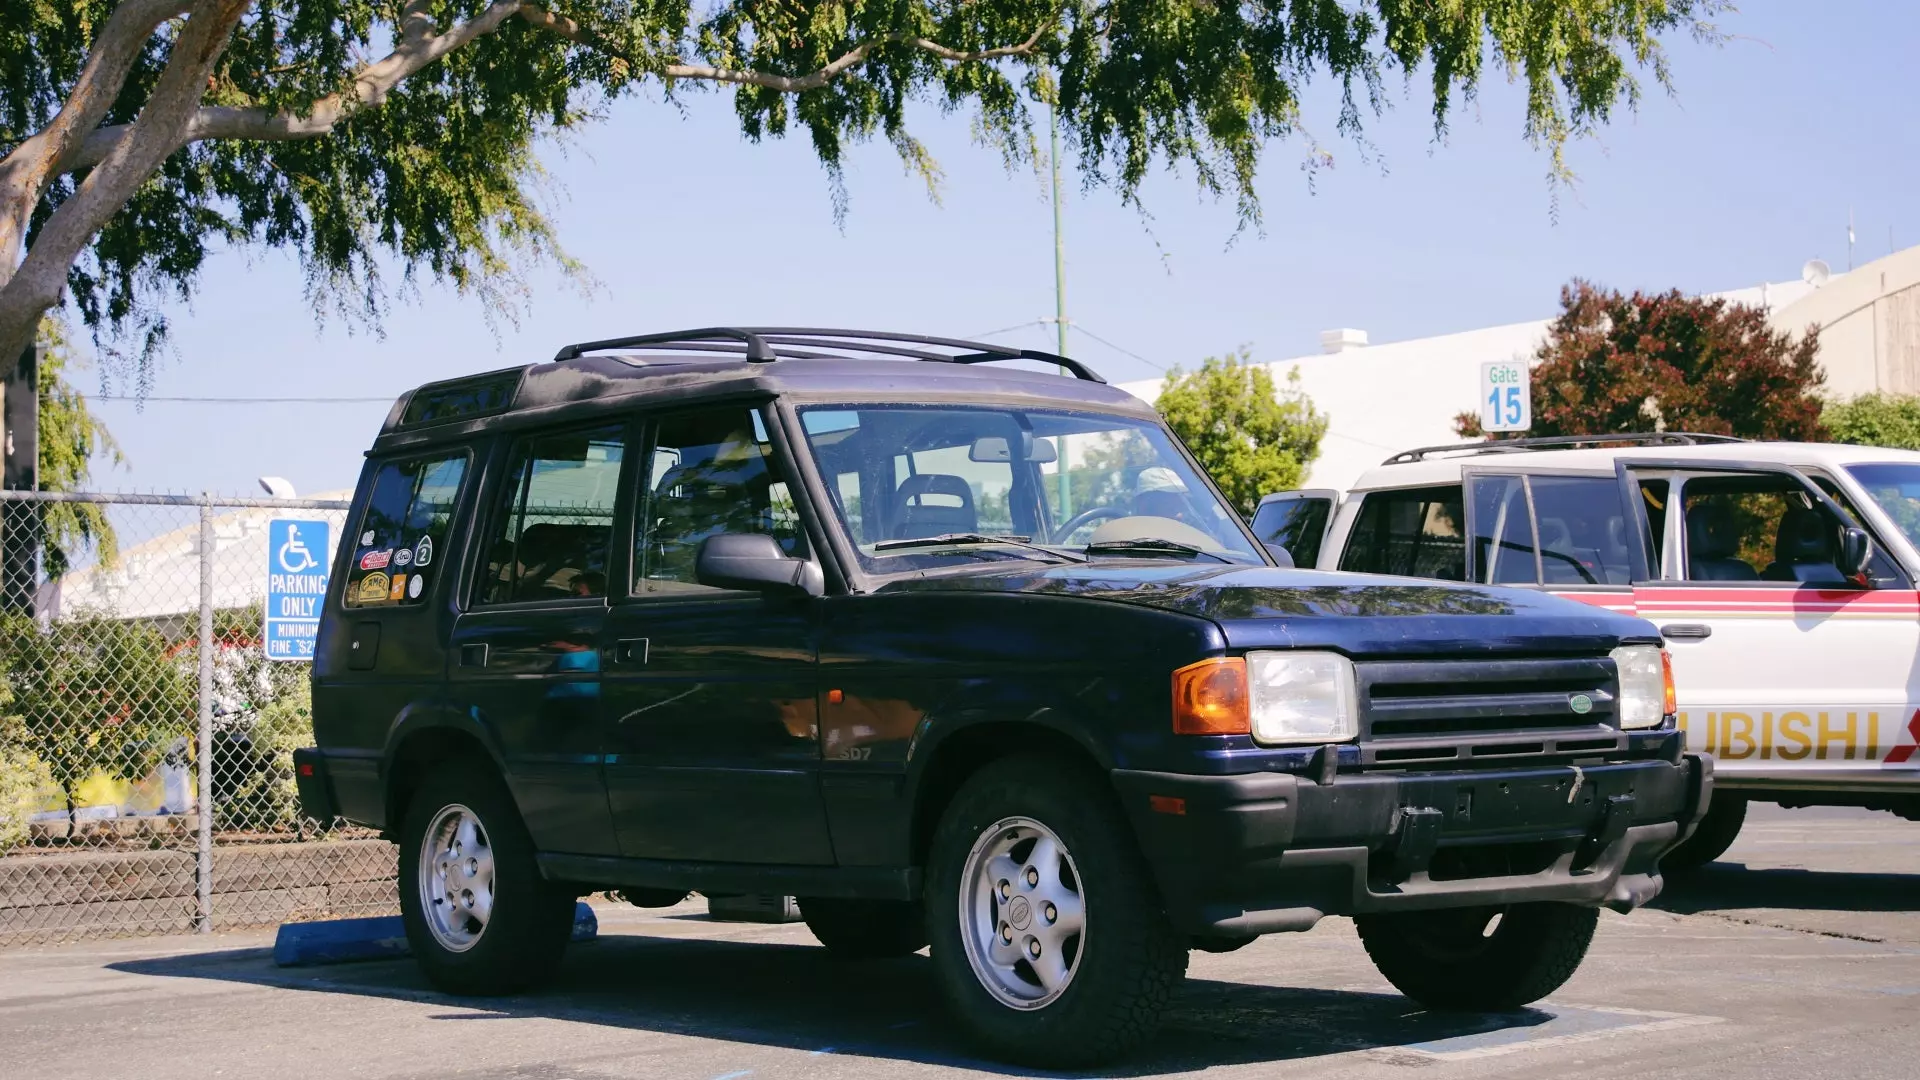 My Old Land Rover And I Survived Our First 850 Mile-Road Trip Together | Autance